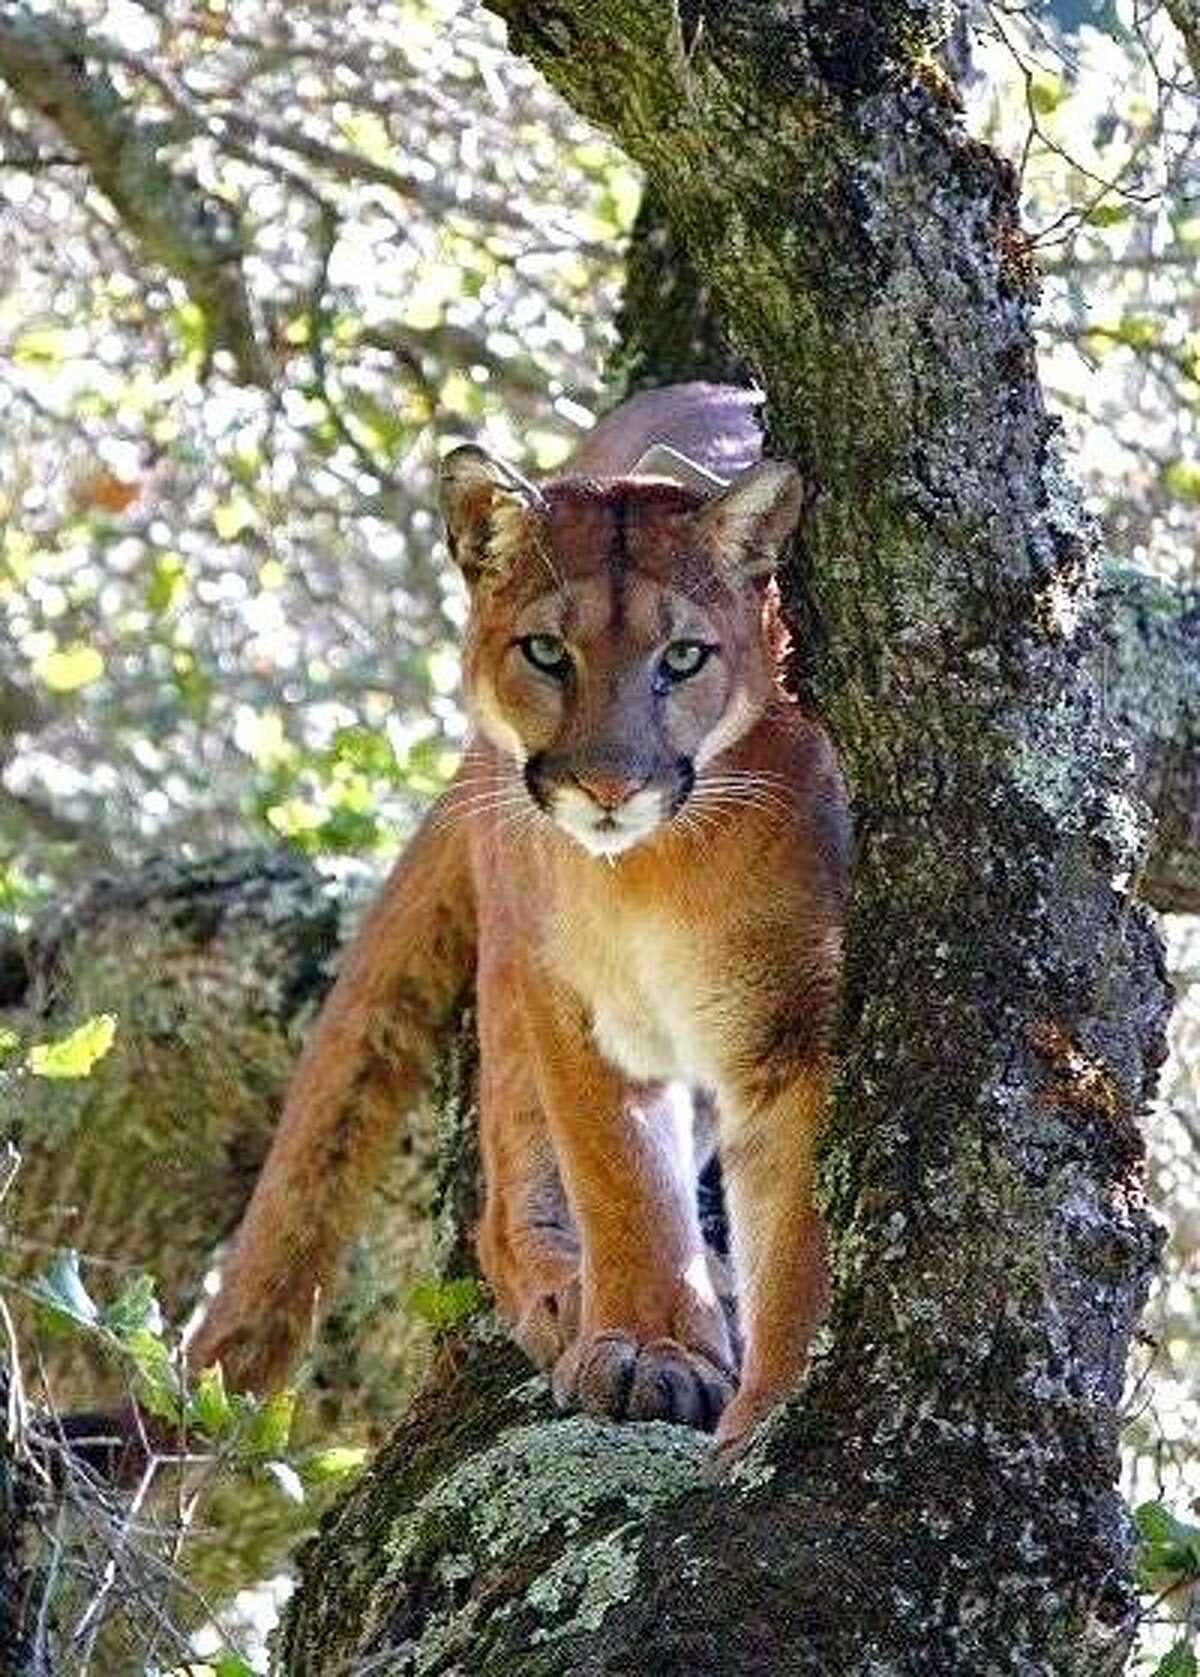 This mountain lion was caught on camera during the UC Santa Cruz study showing the level of fear predators display when human voices are heard in the area.